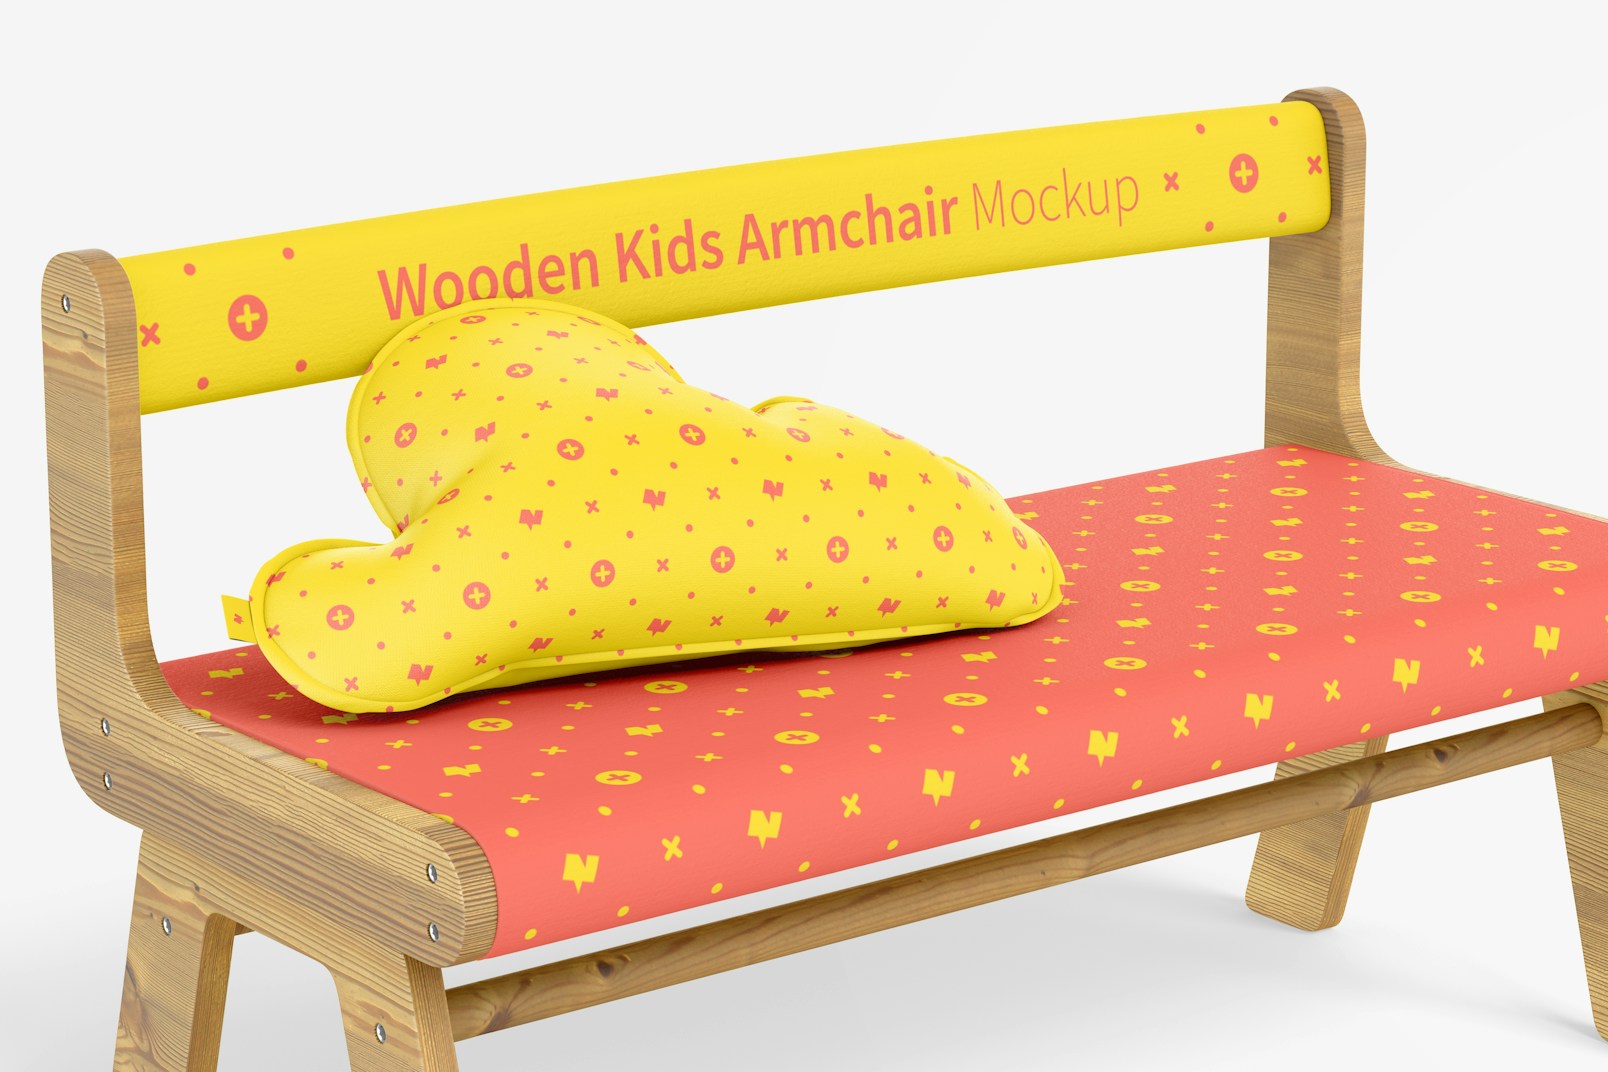 Wooden Kids Armchair Mockup, Close Up